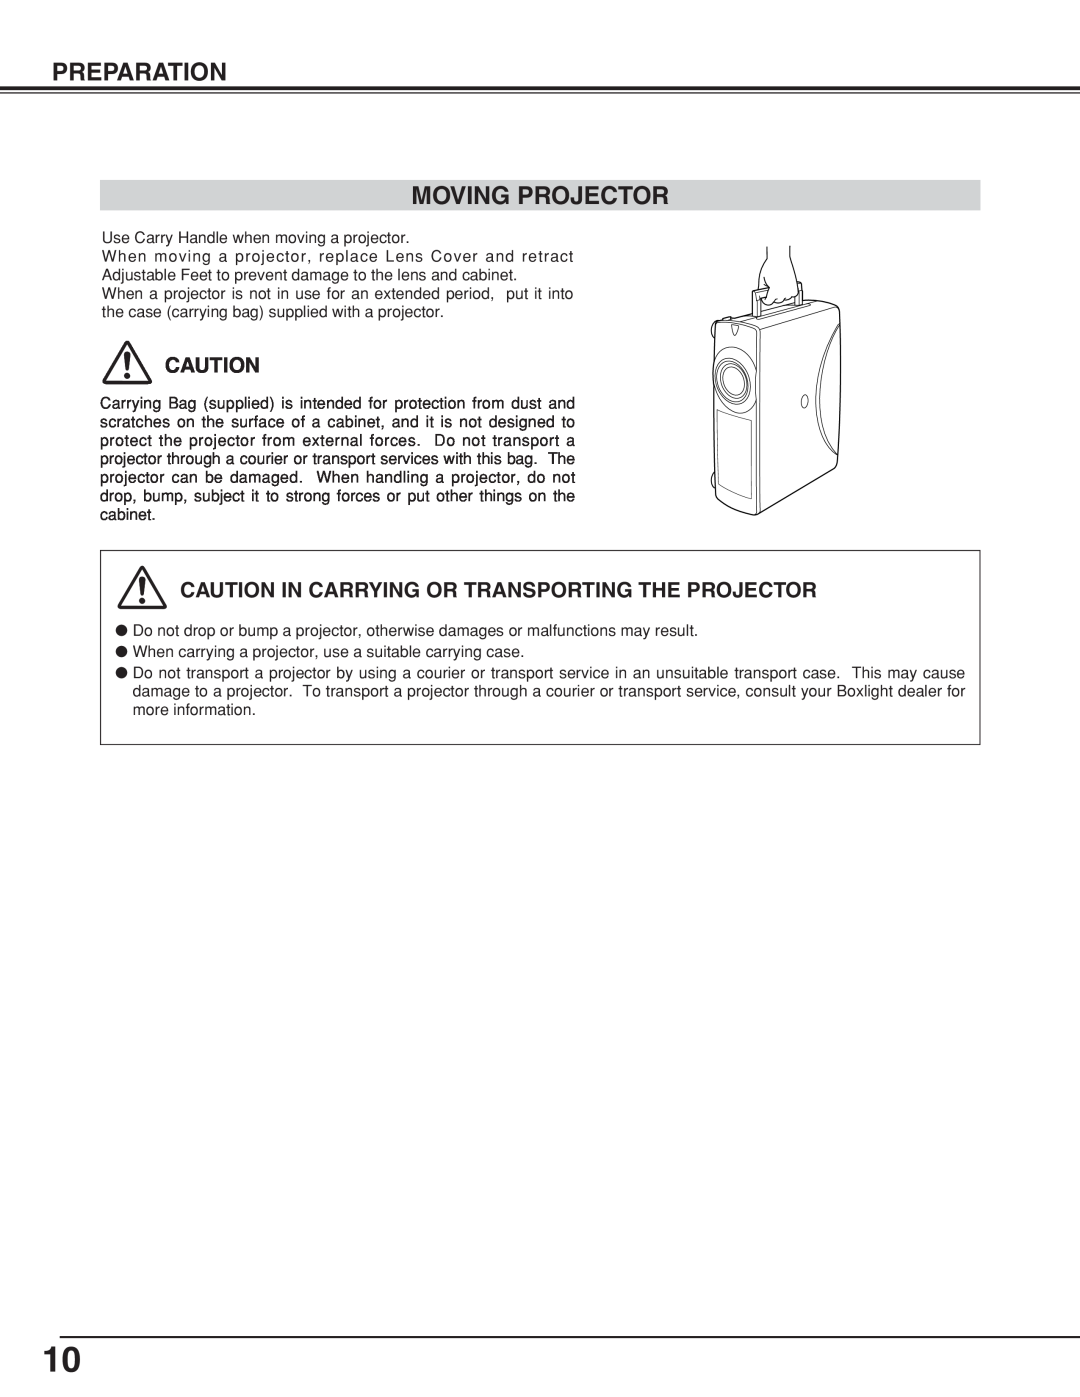 BOXLIGHT CP-19t manual Preparation Moving Projector, Caution In Carrying Or Transporting The Projector 